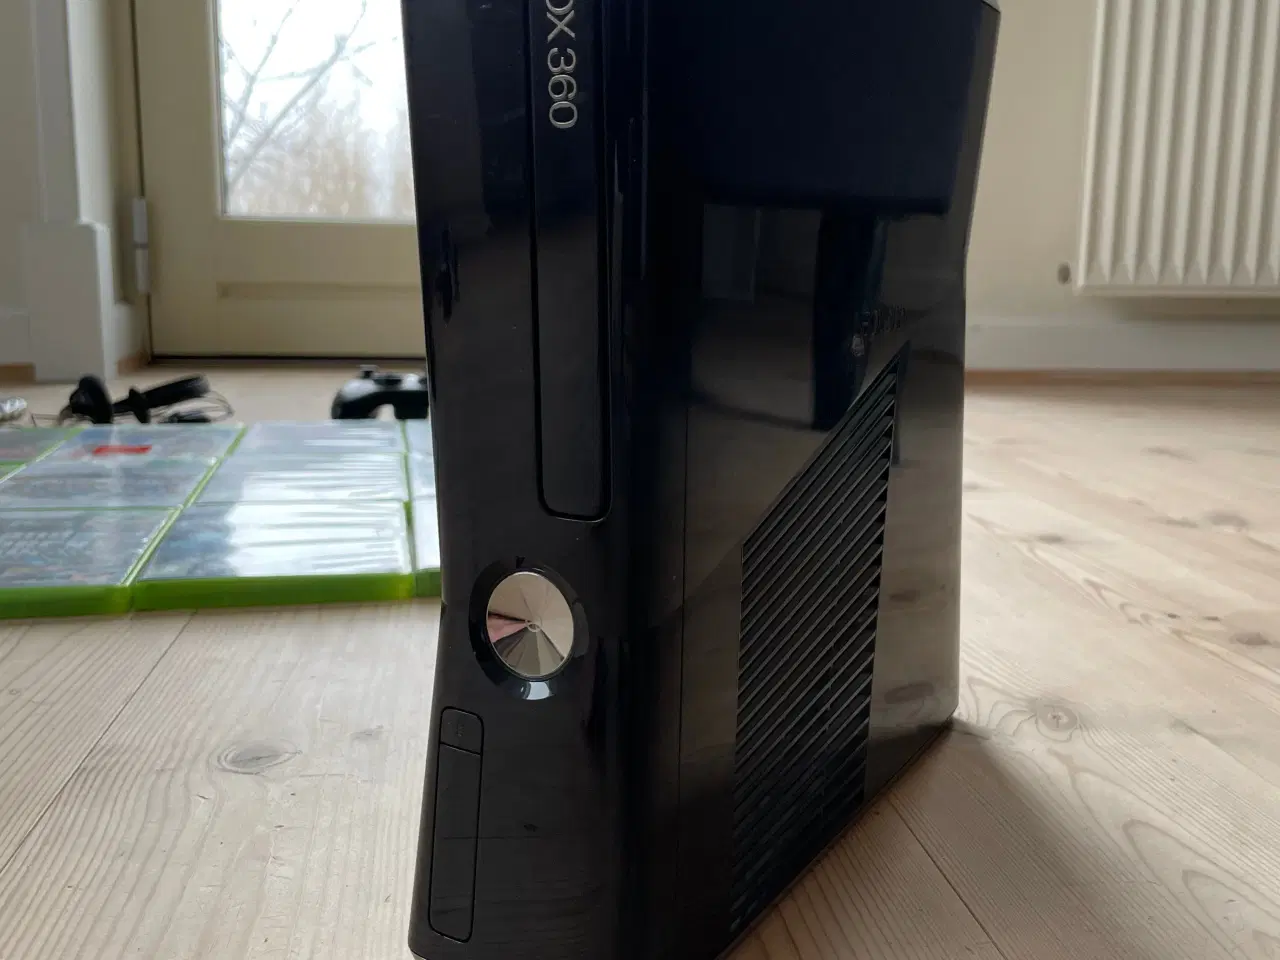 Billede 1 - Xbox 360, Kinect special edition 250 gb harddrive